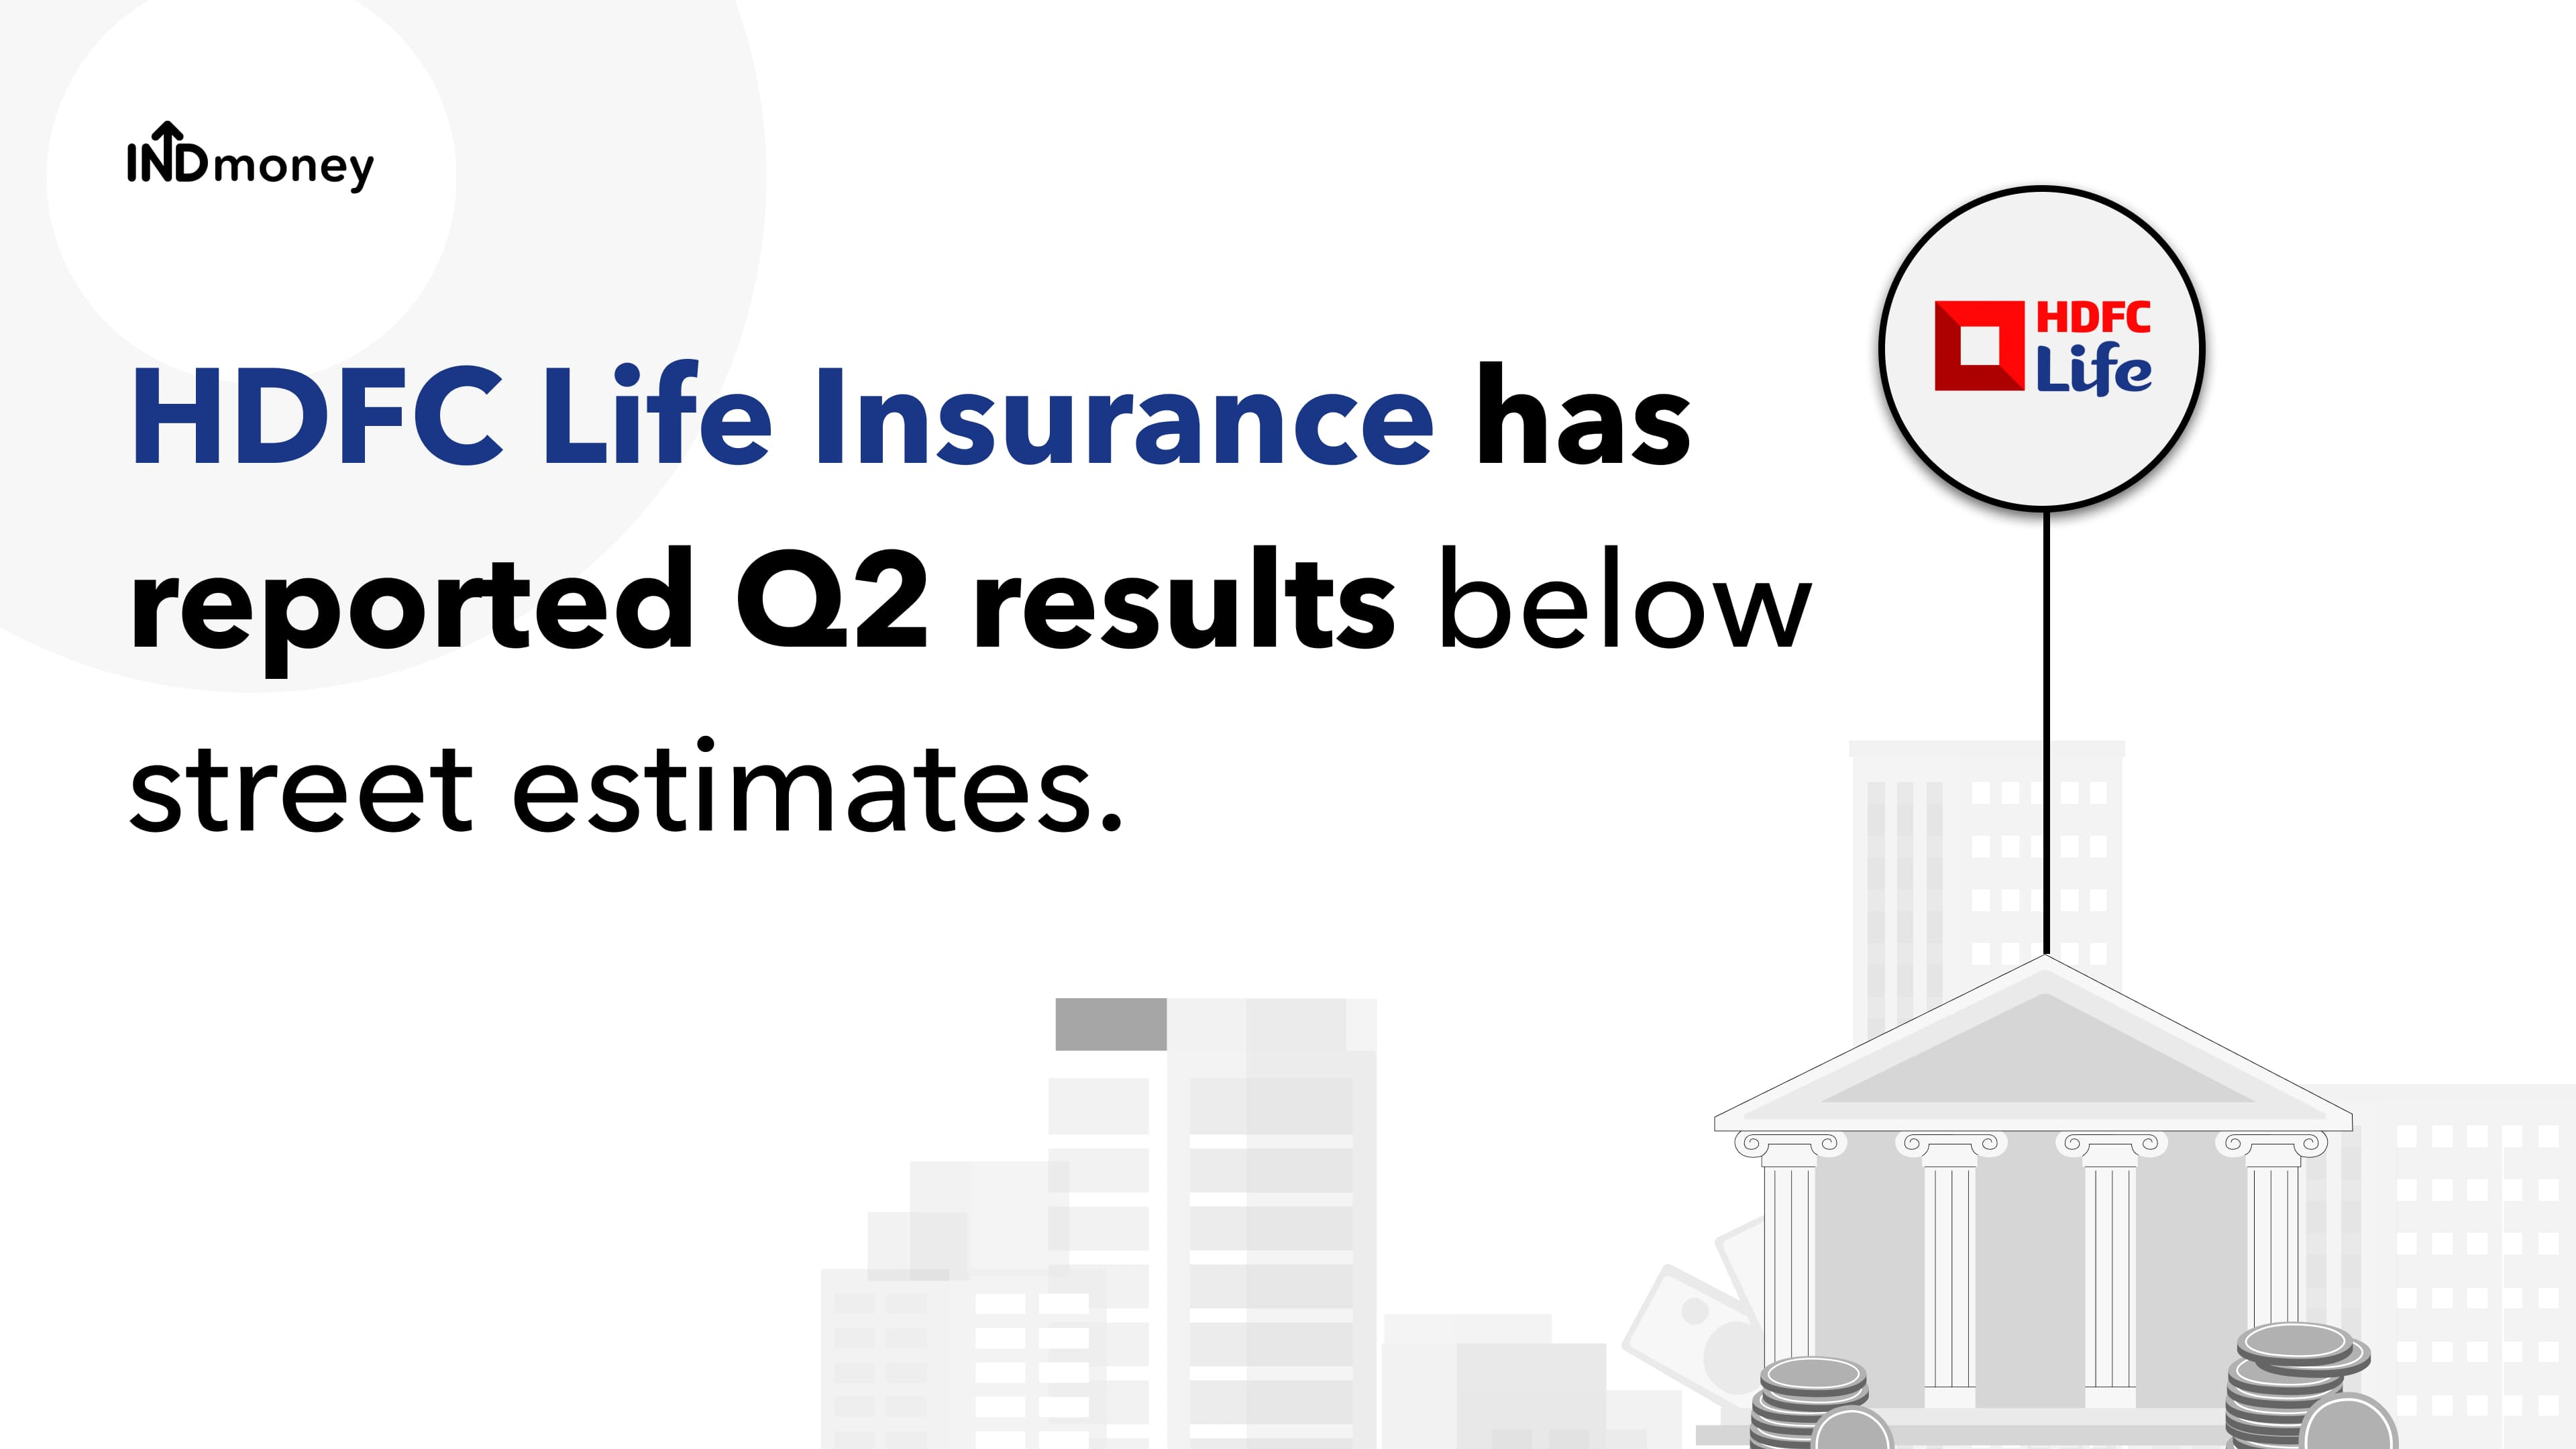 HDFC Life Results: HDFC Life Q2 Results (2021-22) Date, Earnings, News & More